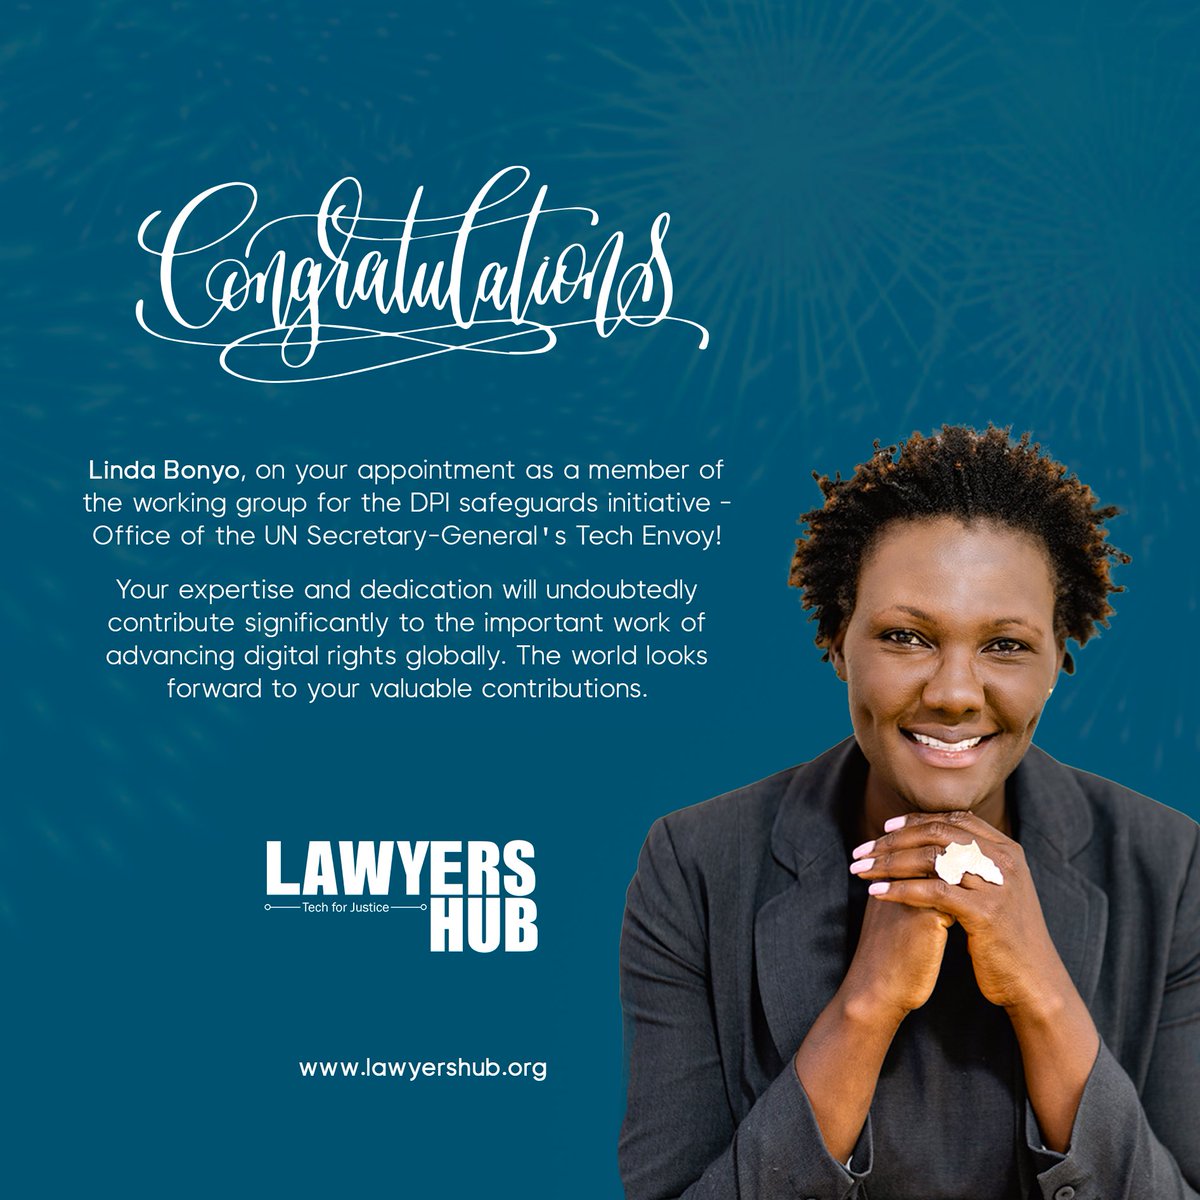 🎊Join us in congratulating our CEO & Founder, @BonyoLinda, on her appointment to the #DPI safeguards initiative - Office of the UN Secretary-General's #Tech Envoy! 🌍To learn more about her and her work visit our website at lawyershub.org